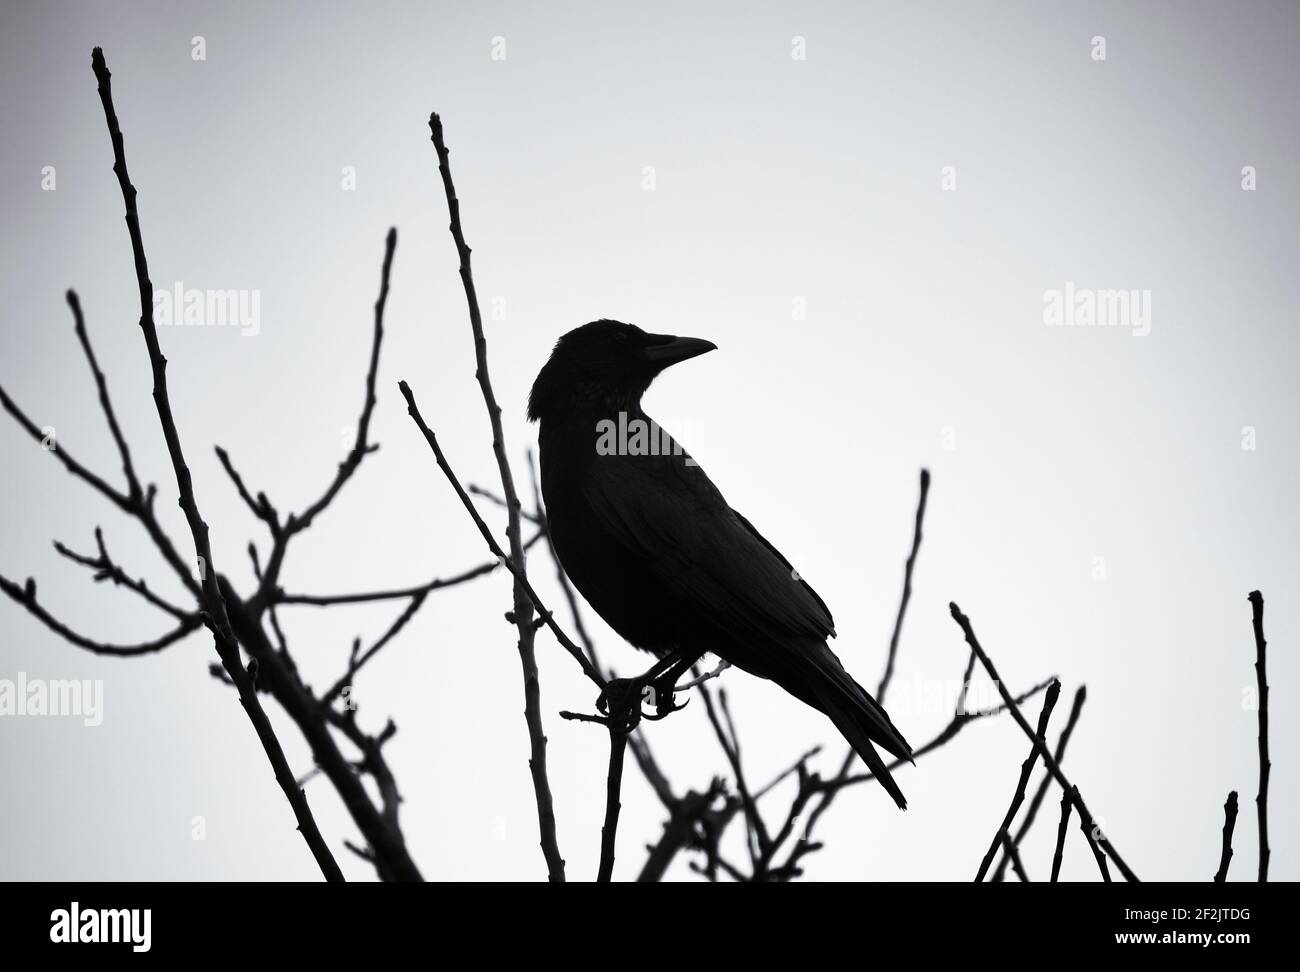 Silhouette of a bird on a tree in winter;  UK Stock Photo